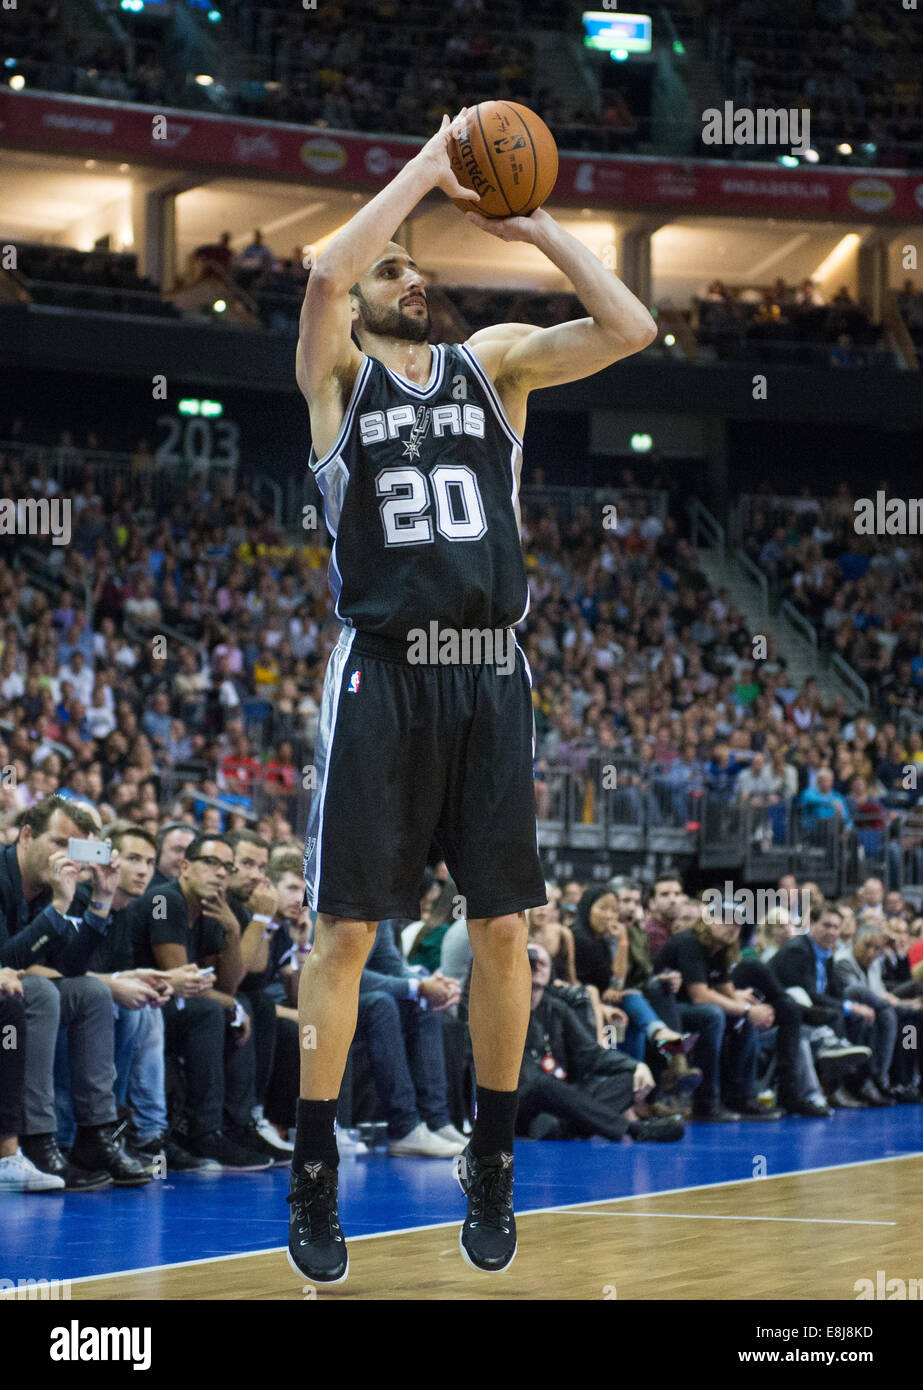 Berlin, Germany. 08th Oct, 2014. San Antonio's Manu Ginobili in action during the basketball game between Alba Berlin and the San Antonio Spurs as part of the 'NBA Global Games' in Berlin, Germany, 08 October 2014. Photo: LUKAS SCHULZE/dpa/Alamy Live News Stock Photo